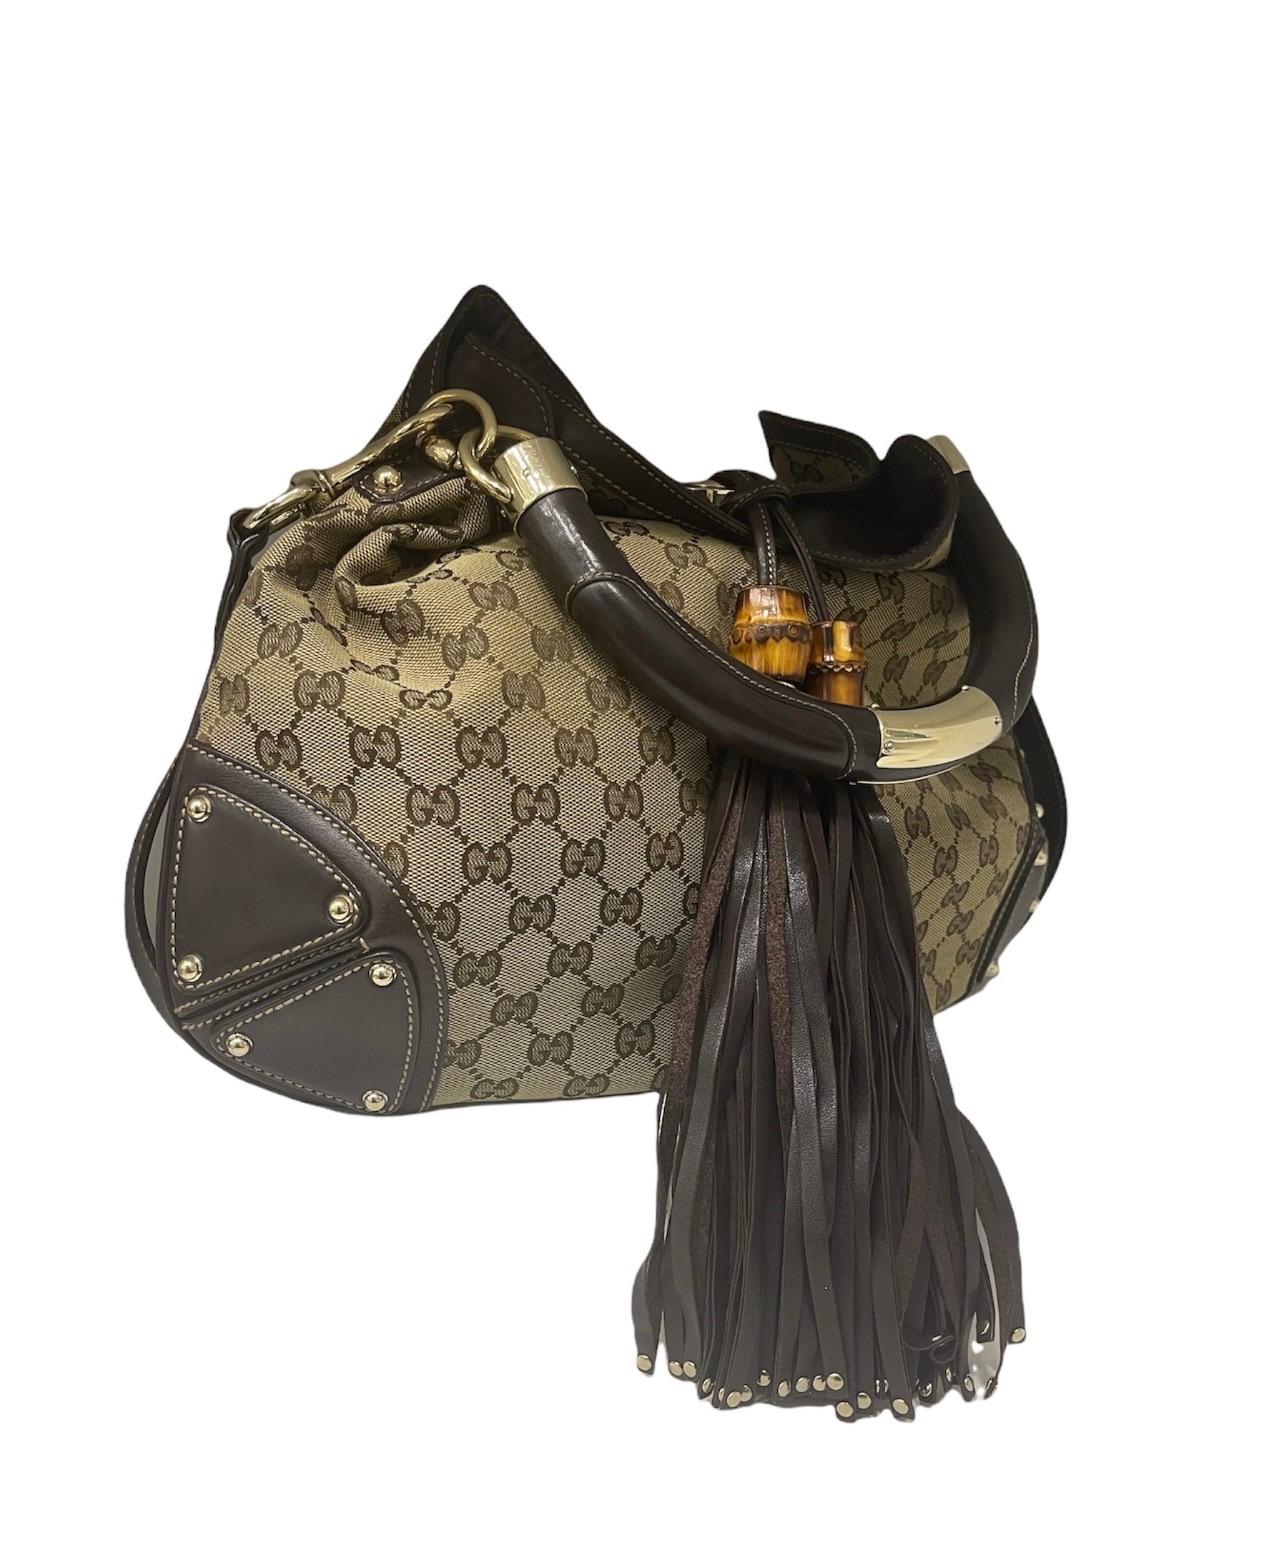 Gucci signed bag, Indy model, made of GG Supreme fabric, with brown leather inserts and golden hardware. Equipped with a magnetic button closure, internally lined in beige fabric, very roomy. Equipped with a rigid leather handle and an internal zip